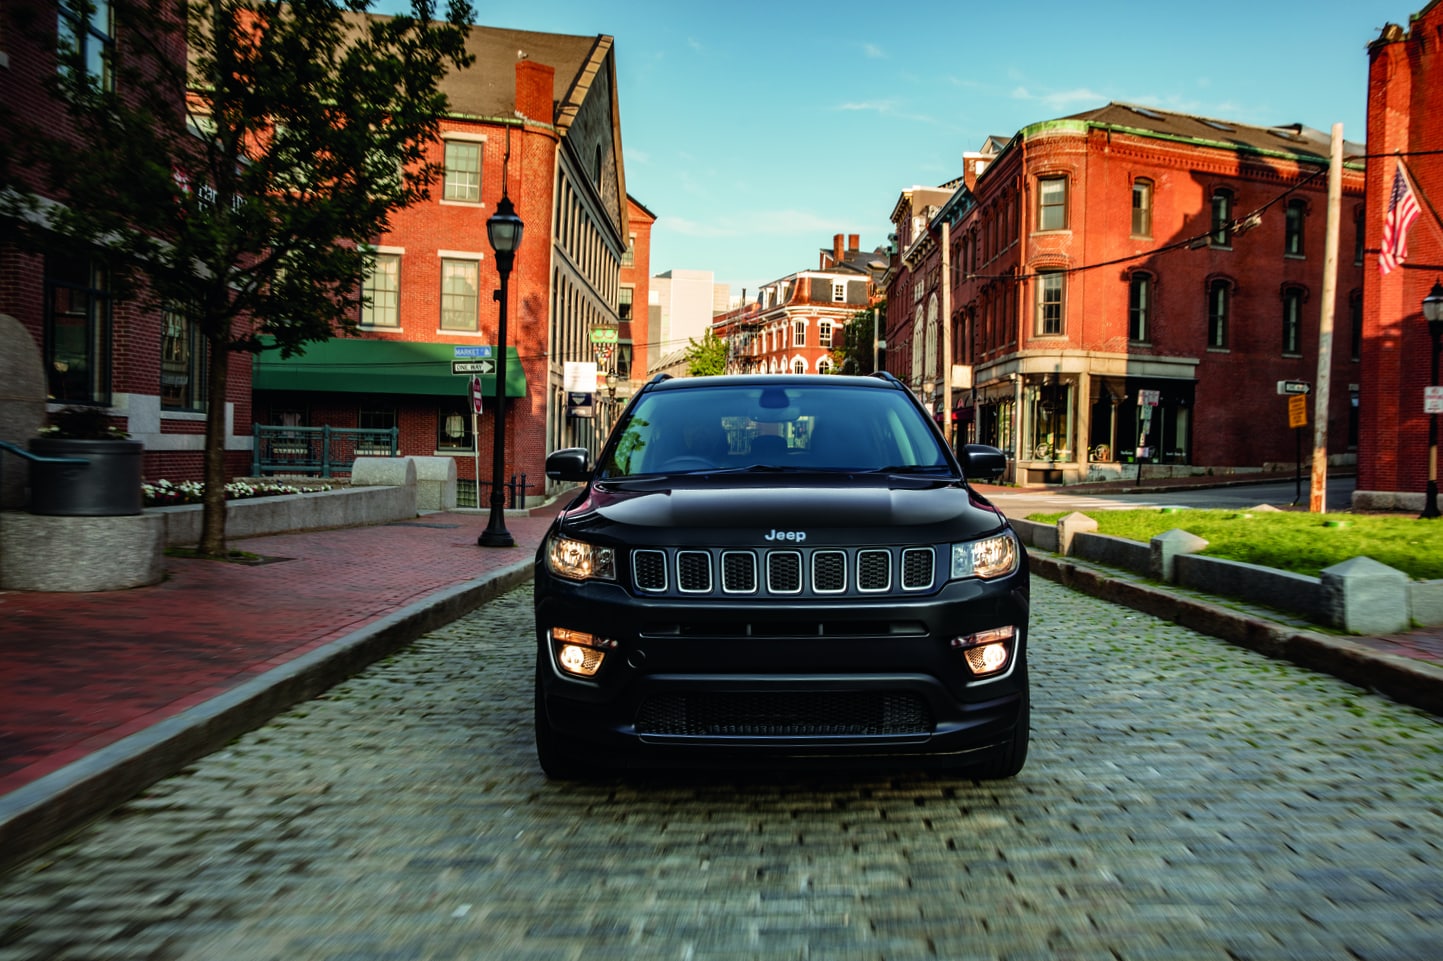 black Jeep Compass SUV parked, grill facing forward, parked on a cobblestone street